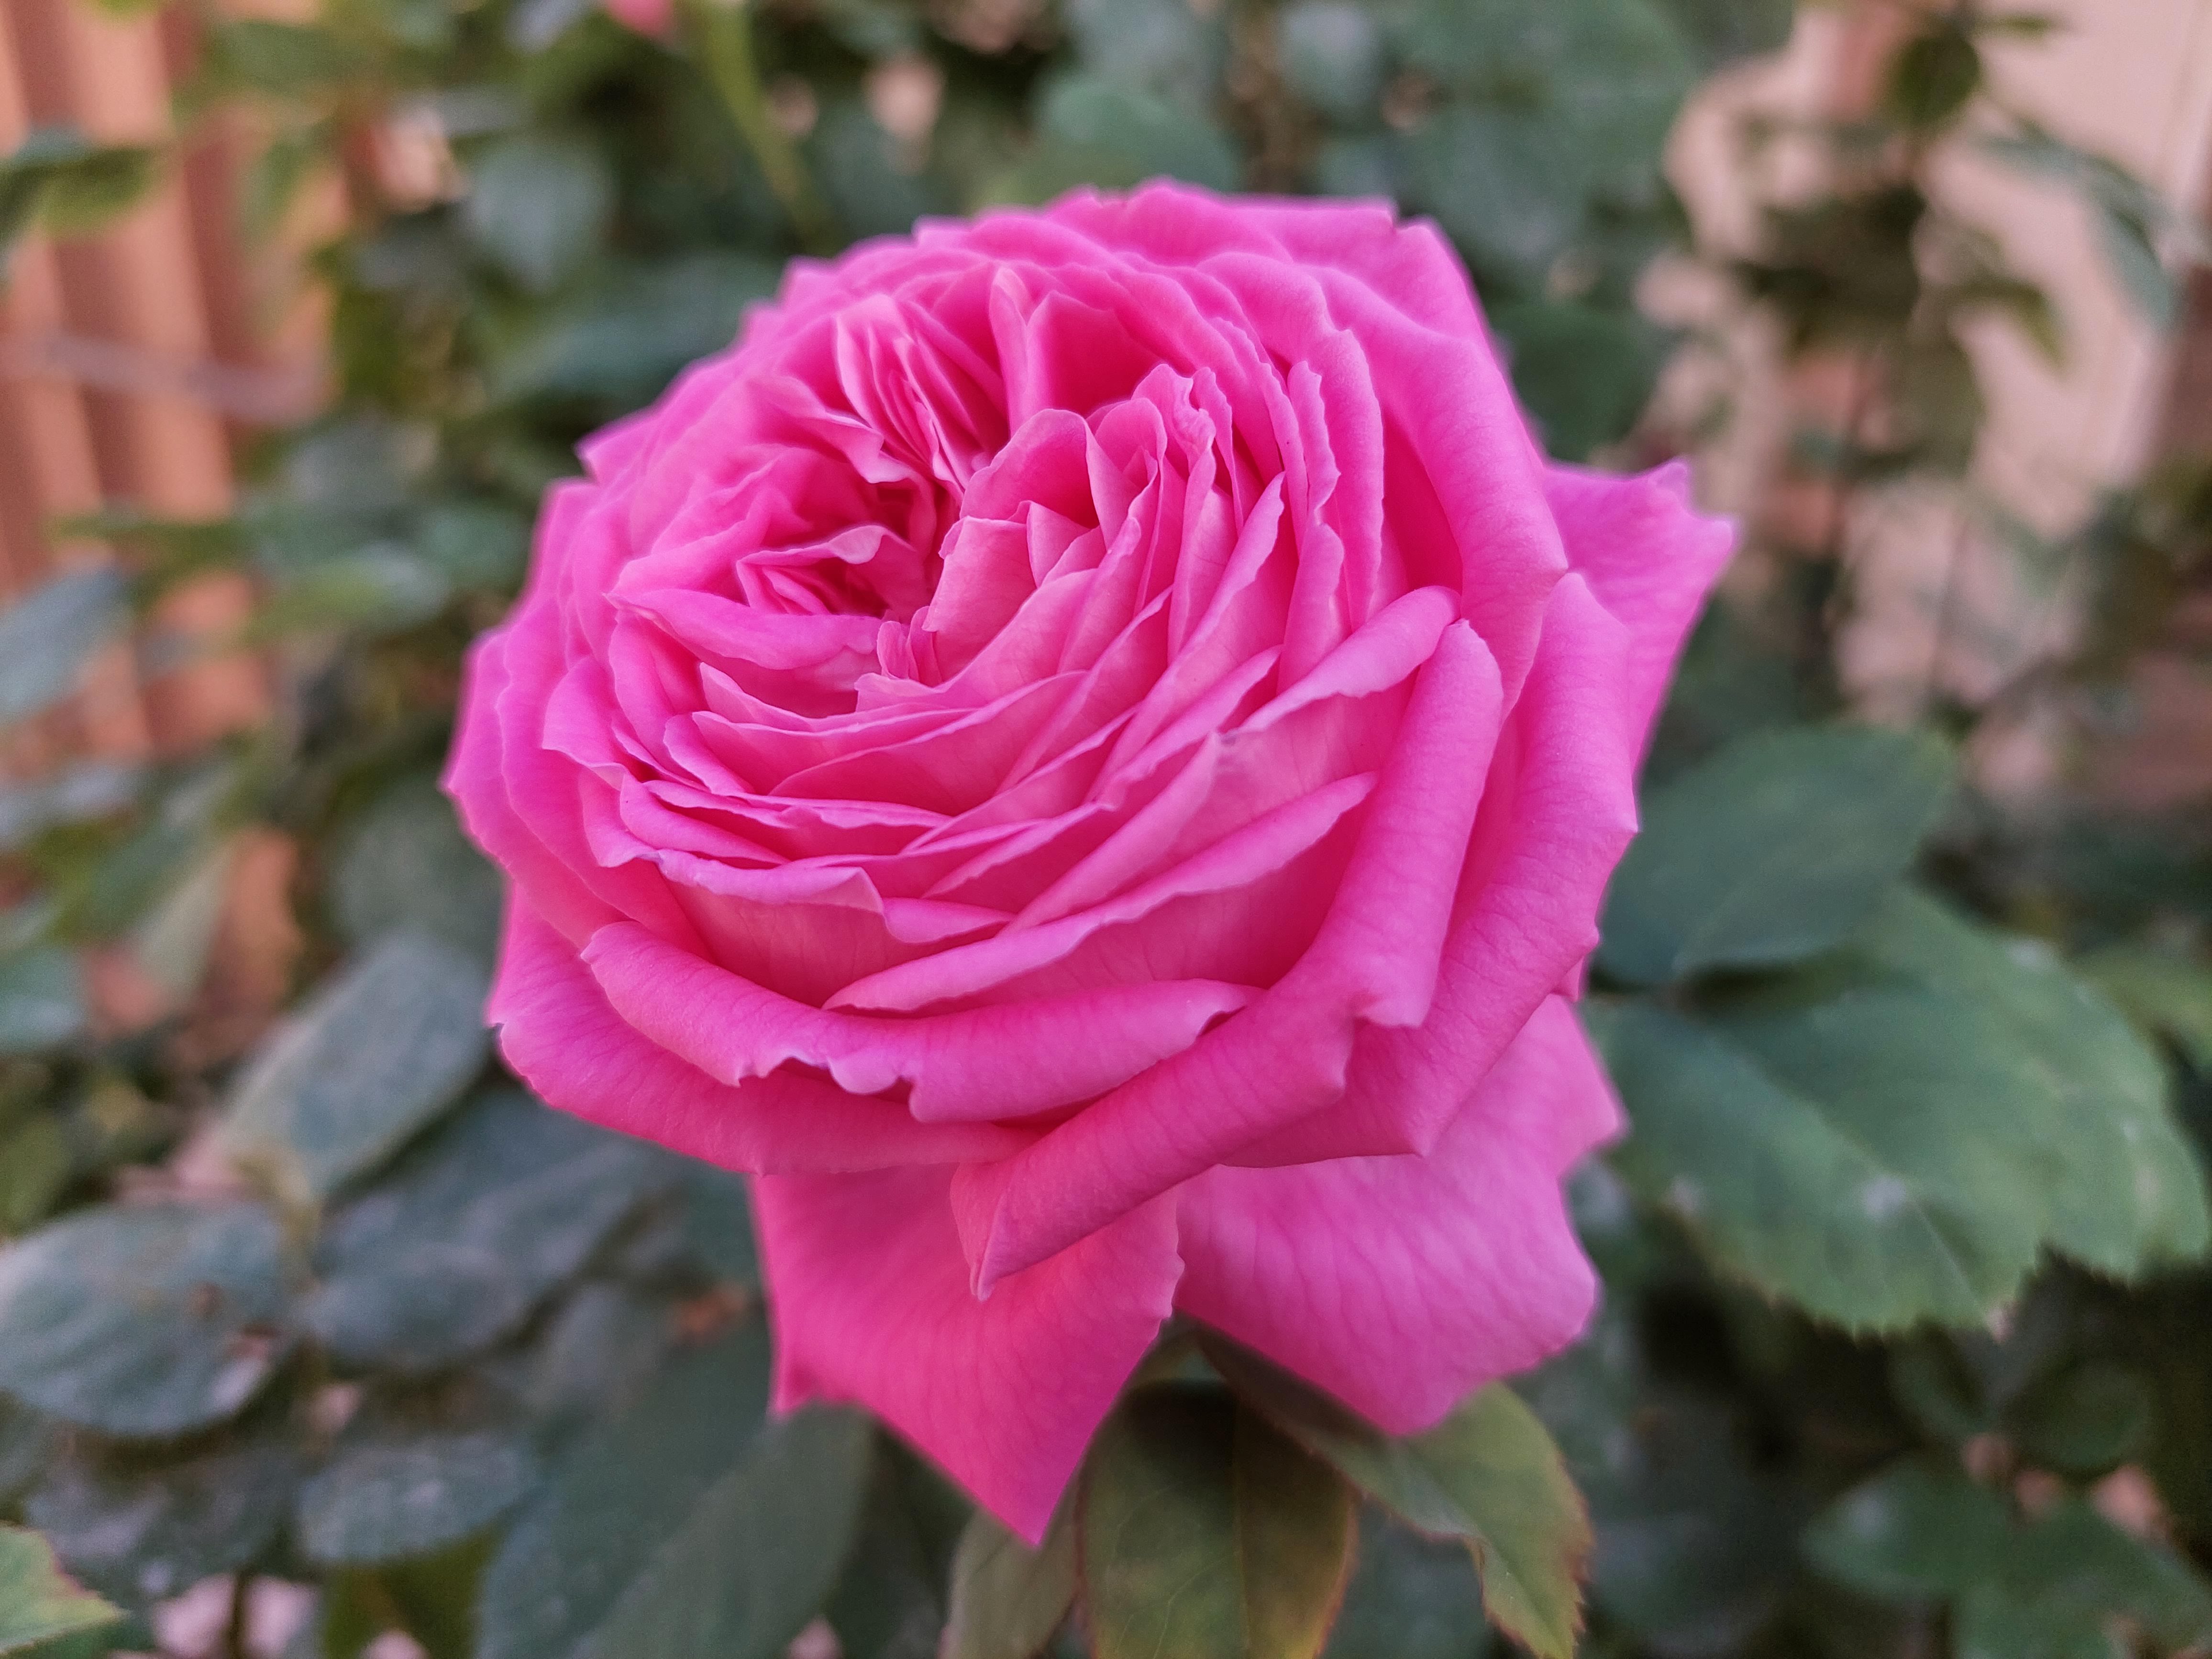 Sample photo of the Galaxy A72 wide-angle camera in good light - an image of a rose